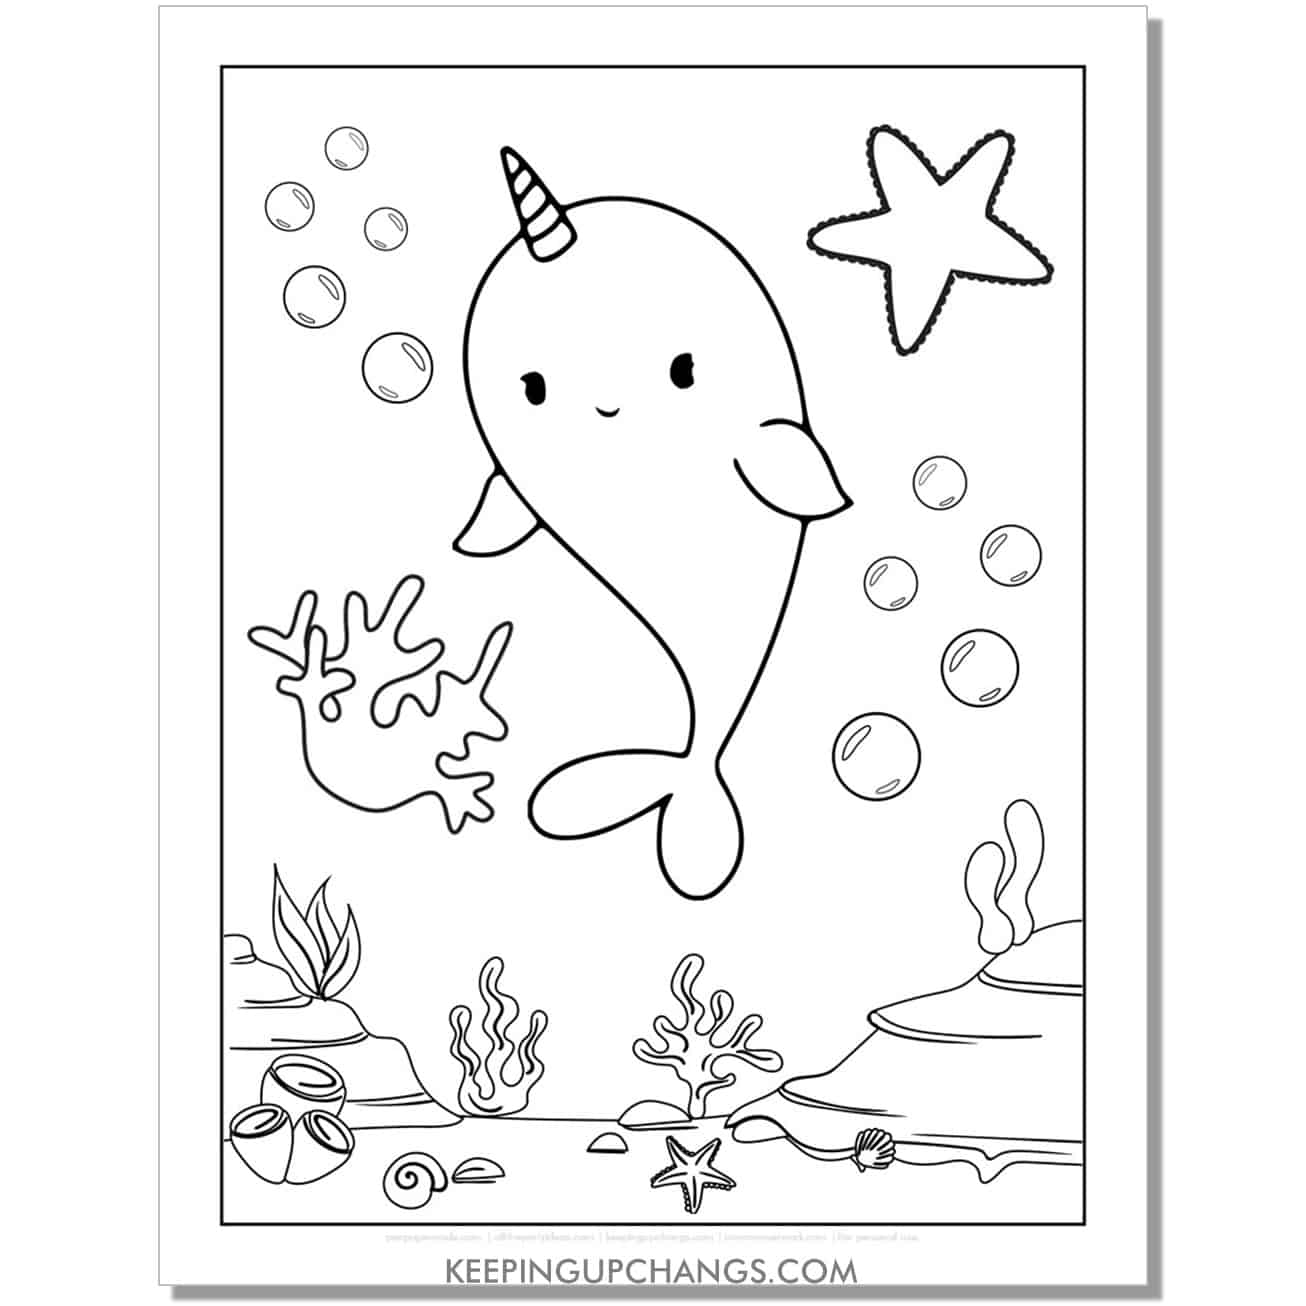 free cute narwhal in ocean coloring page, sheet.